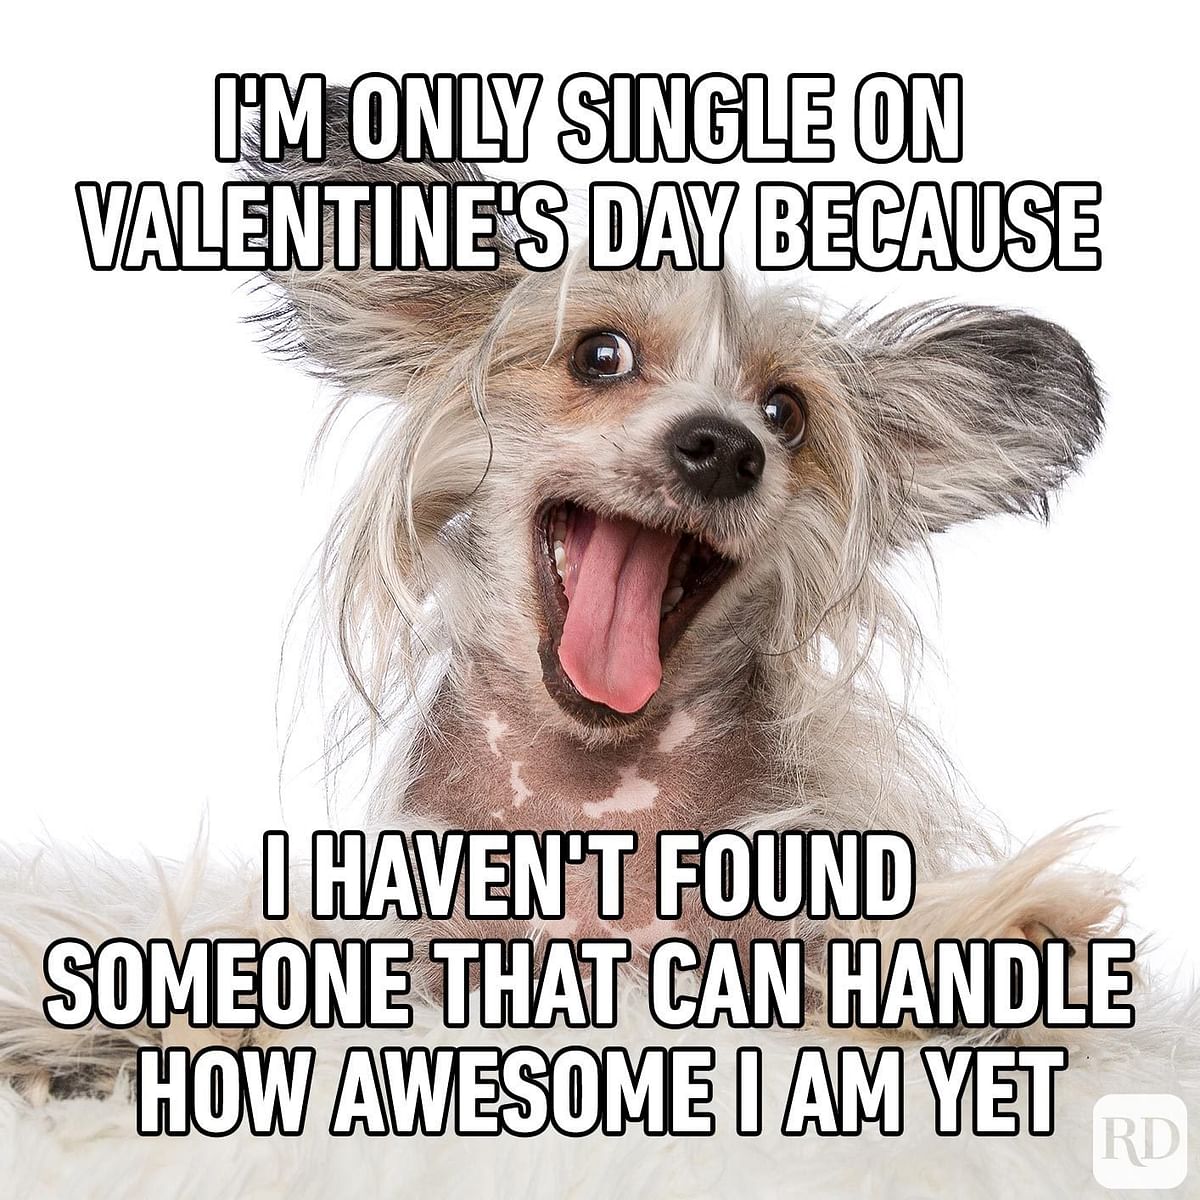 Check out some of the best Valentine's day 2022 quotes, memes, jokes, wishes for all the singles out there